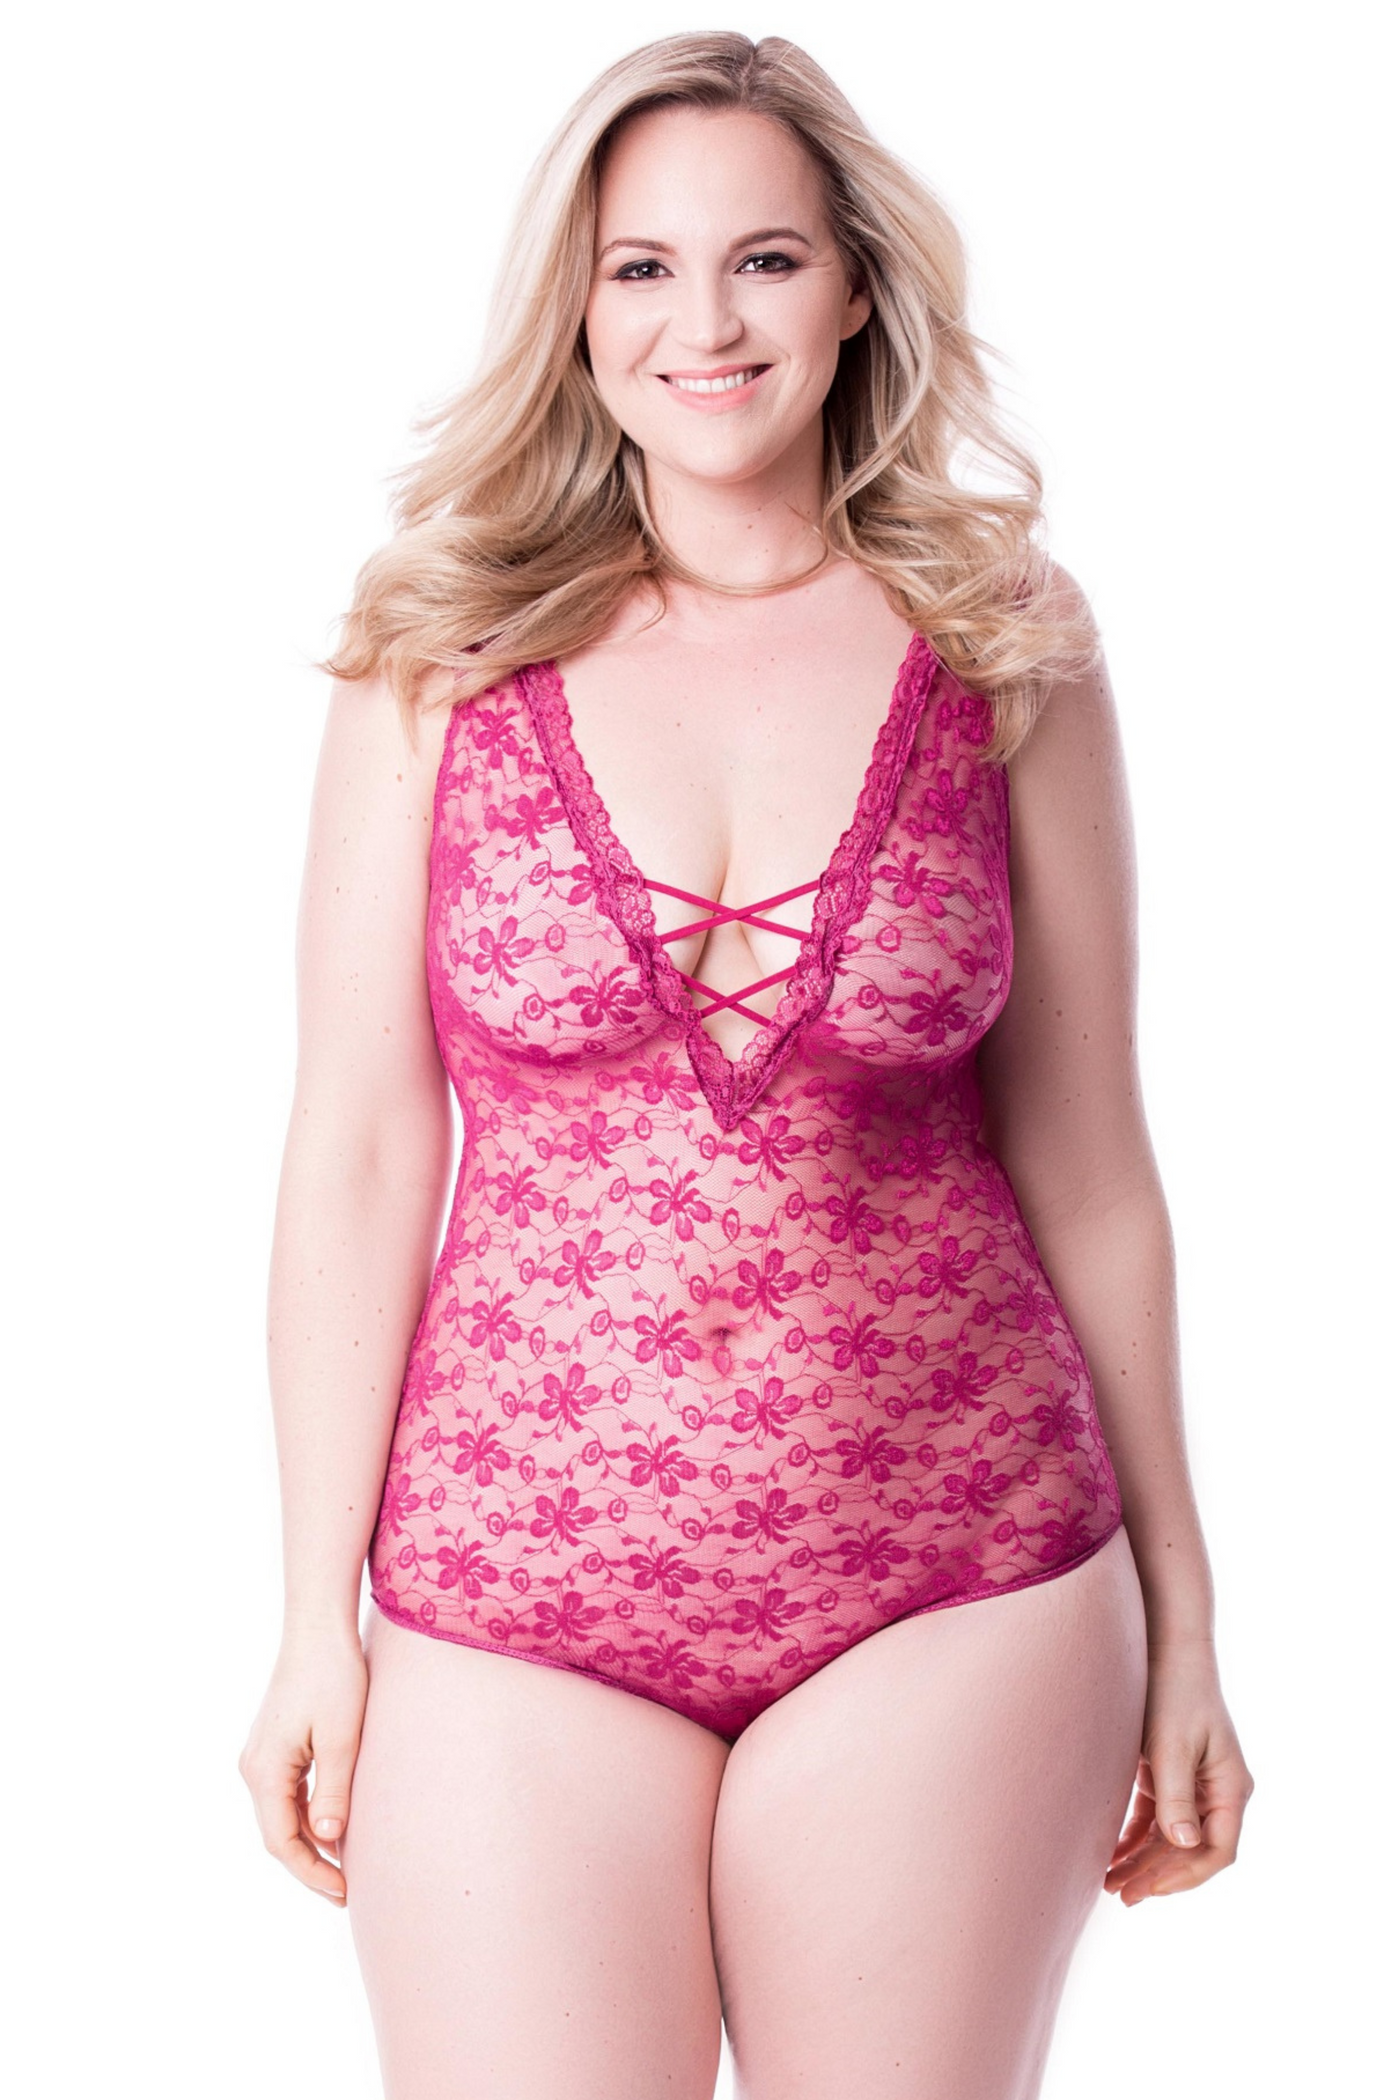 All Over Lace Teddy Lingerie